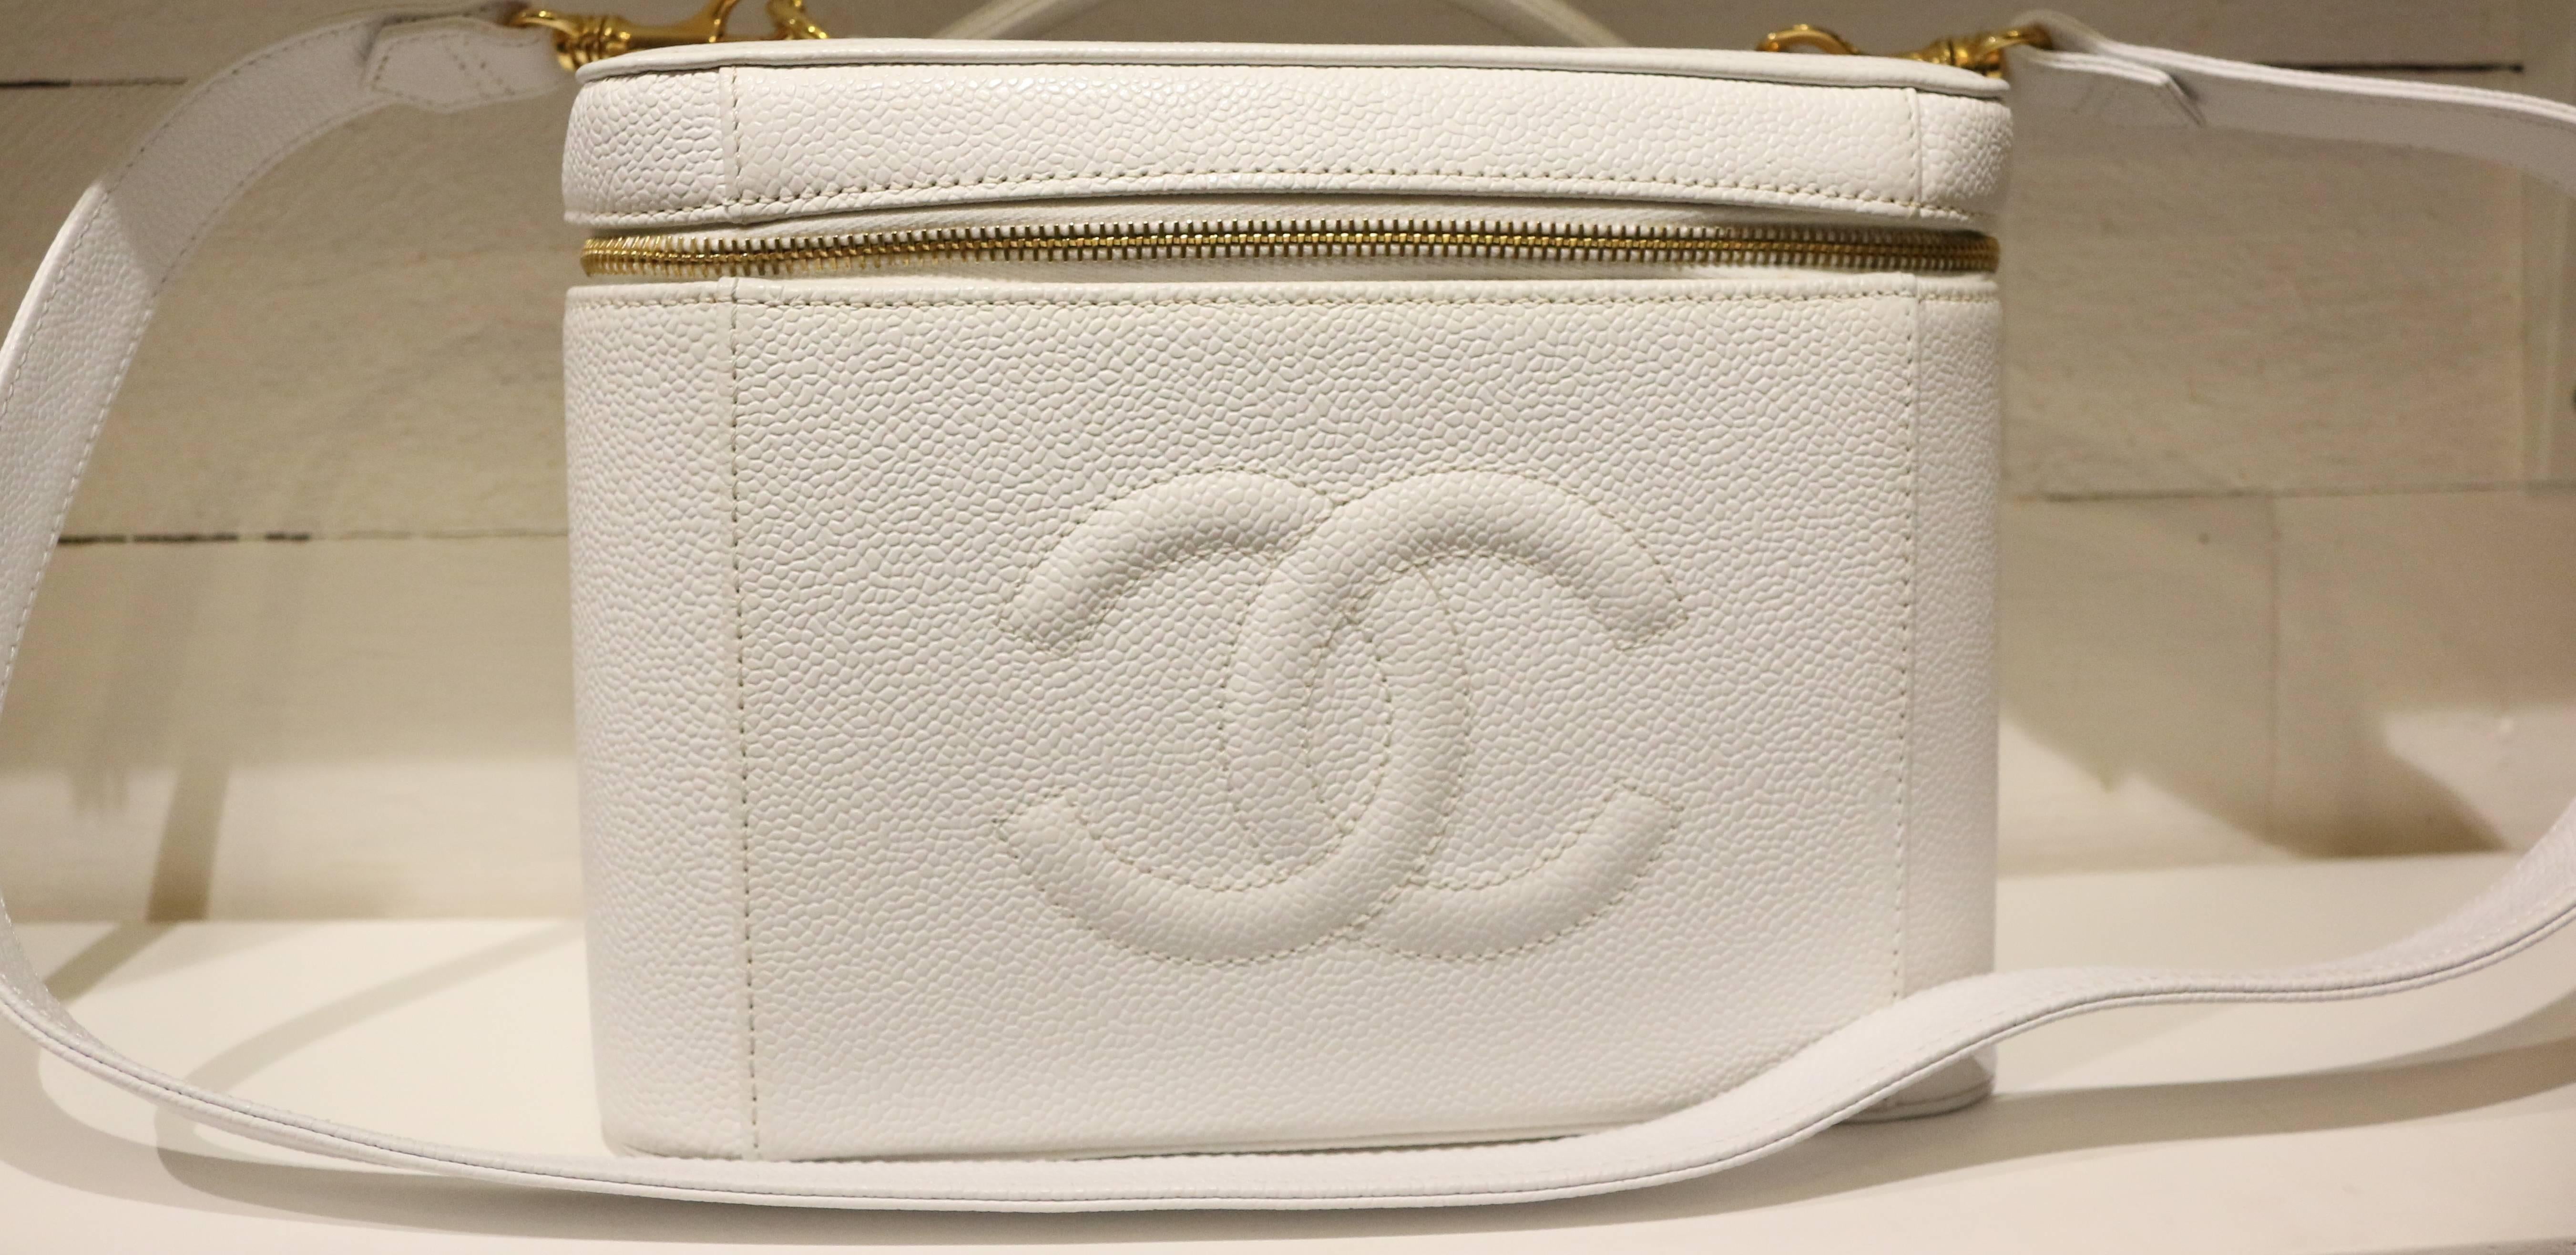 - Vintage 90s Chanel white caviar leather vanity bag with strap. Featuring a come with gold lock, two interior pockets and tag. 

- Made in Italy. 

- Size: W 23cm × H 17cm × D 14cm. Shoulder Strap: 100cm. 

- Size: W 9inches × H 6.5inches × D